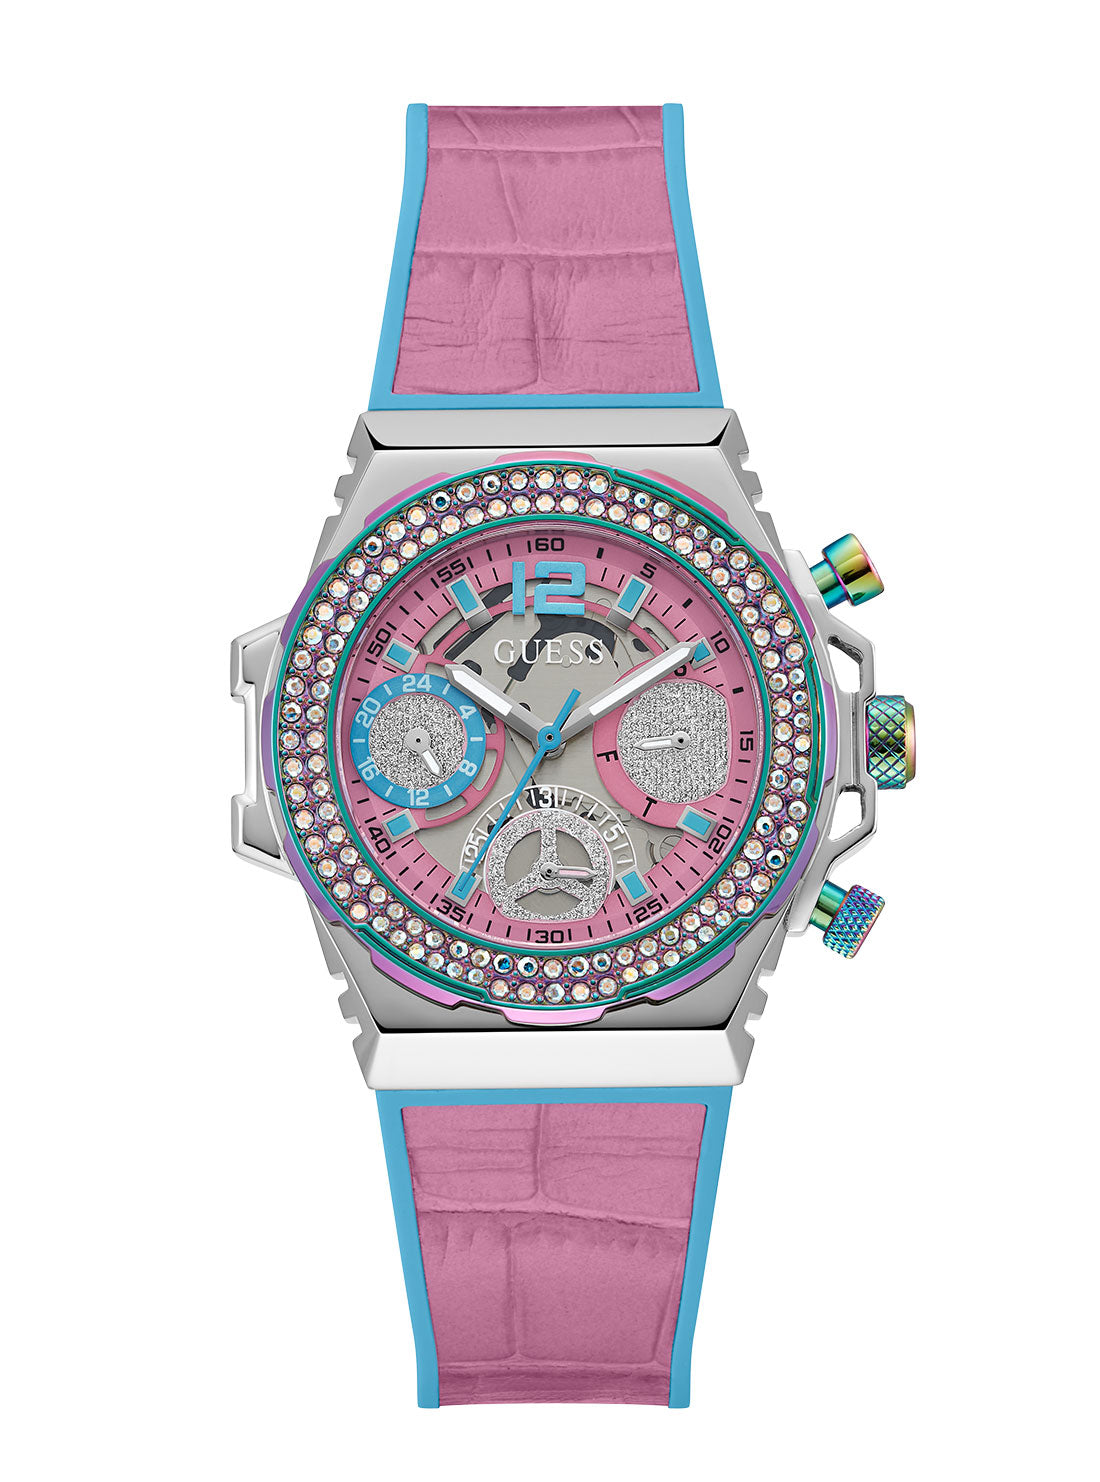 GUESS Women's Pink Turquoise Fusion Silicone Watch GW0553L5 Front View